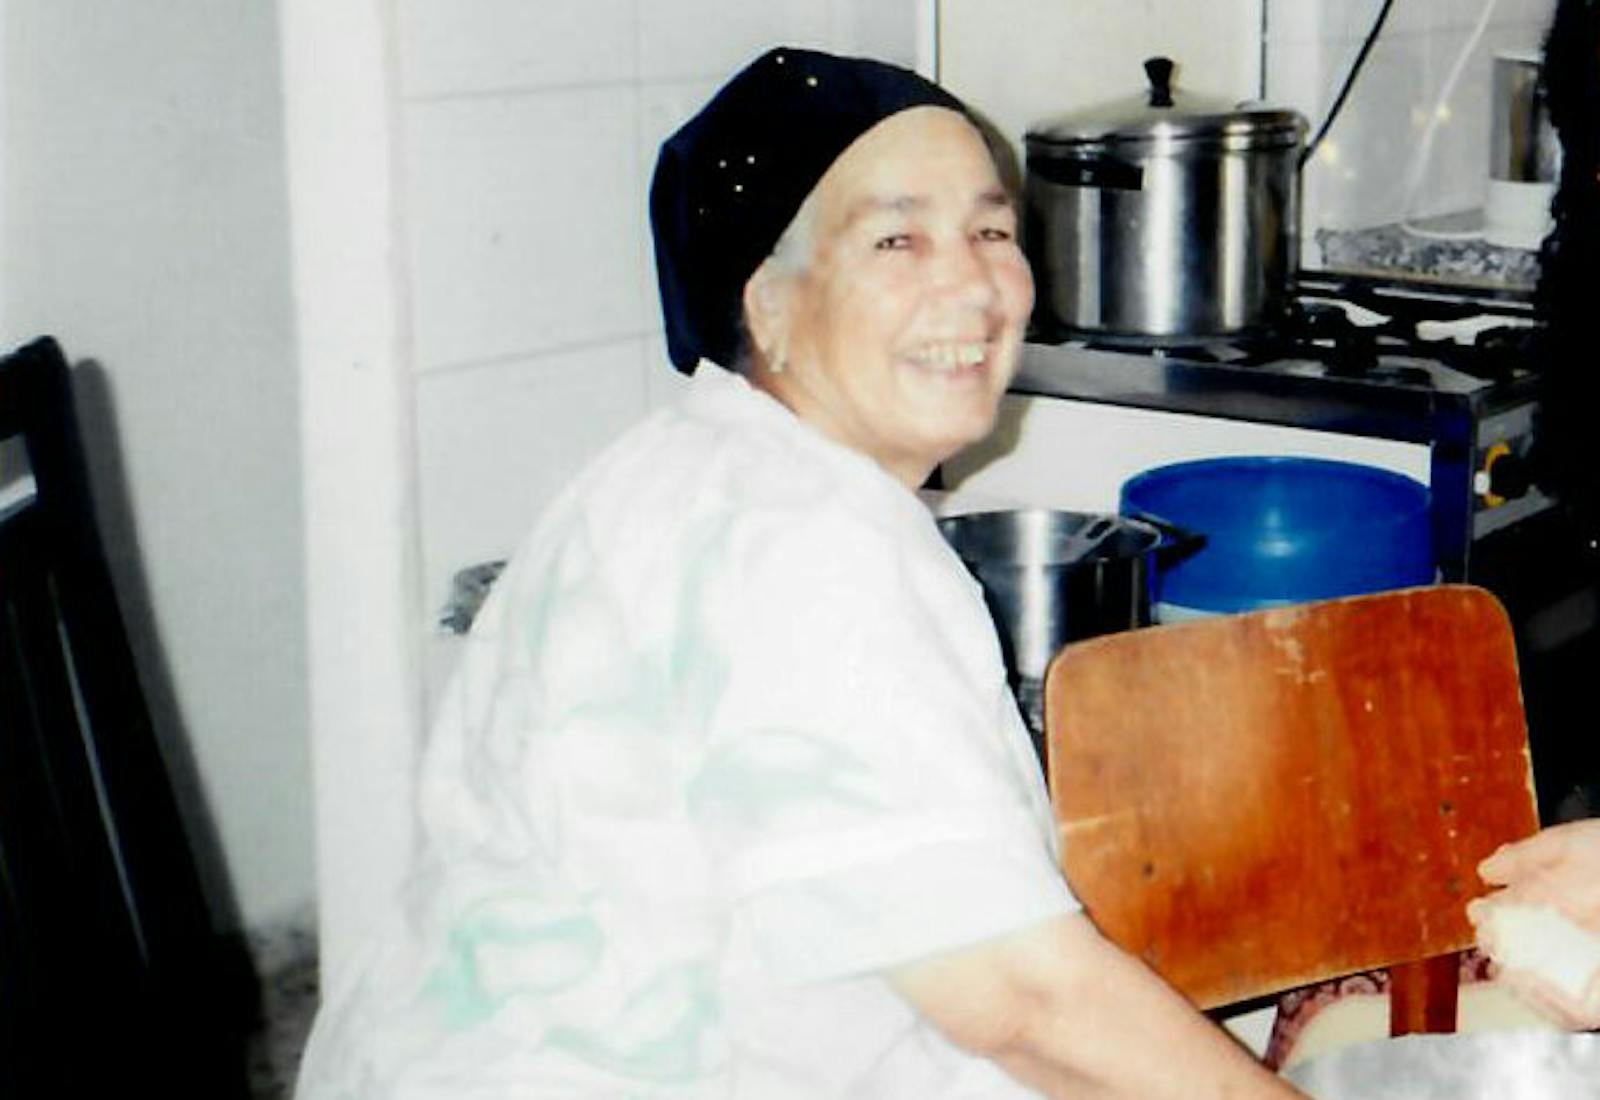 Esther preparing couscous in her kitchen in 1998.